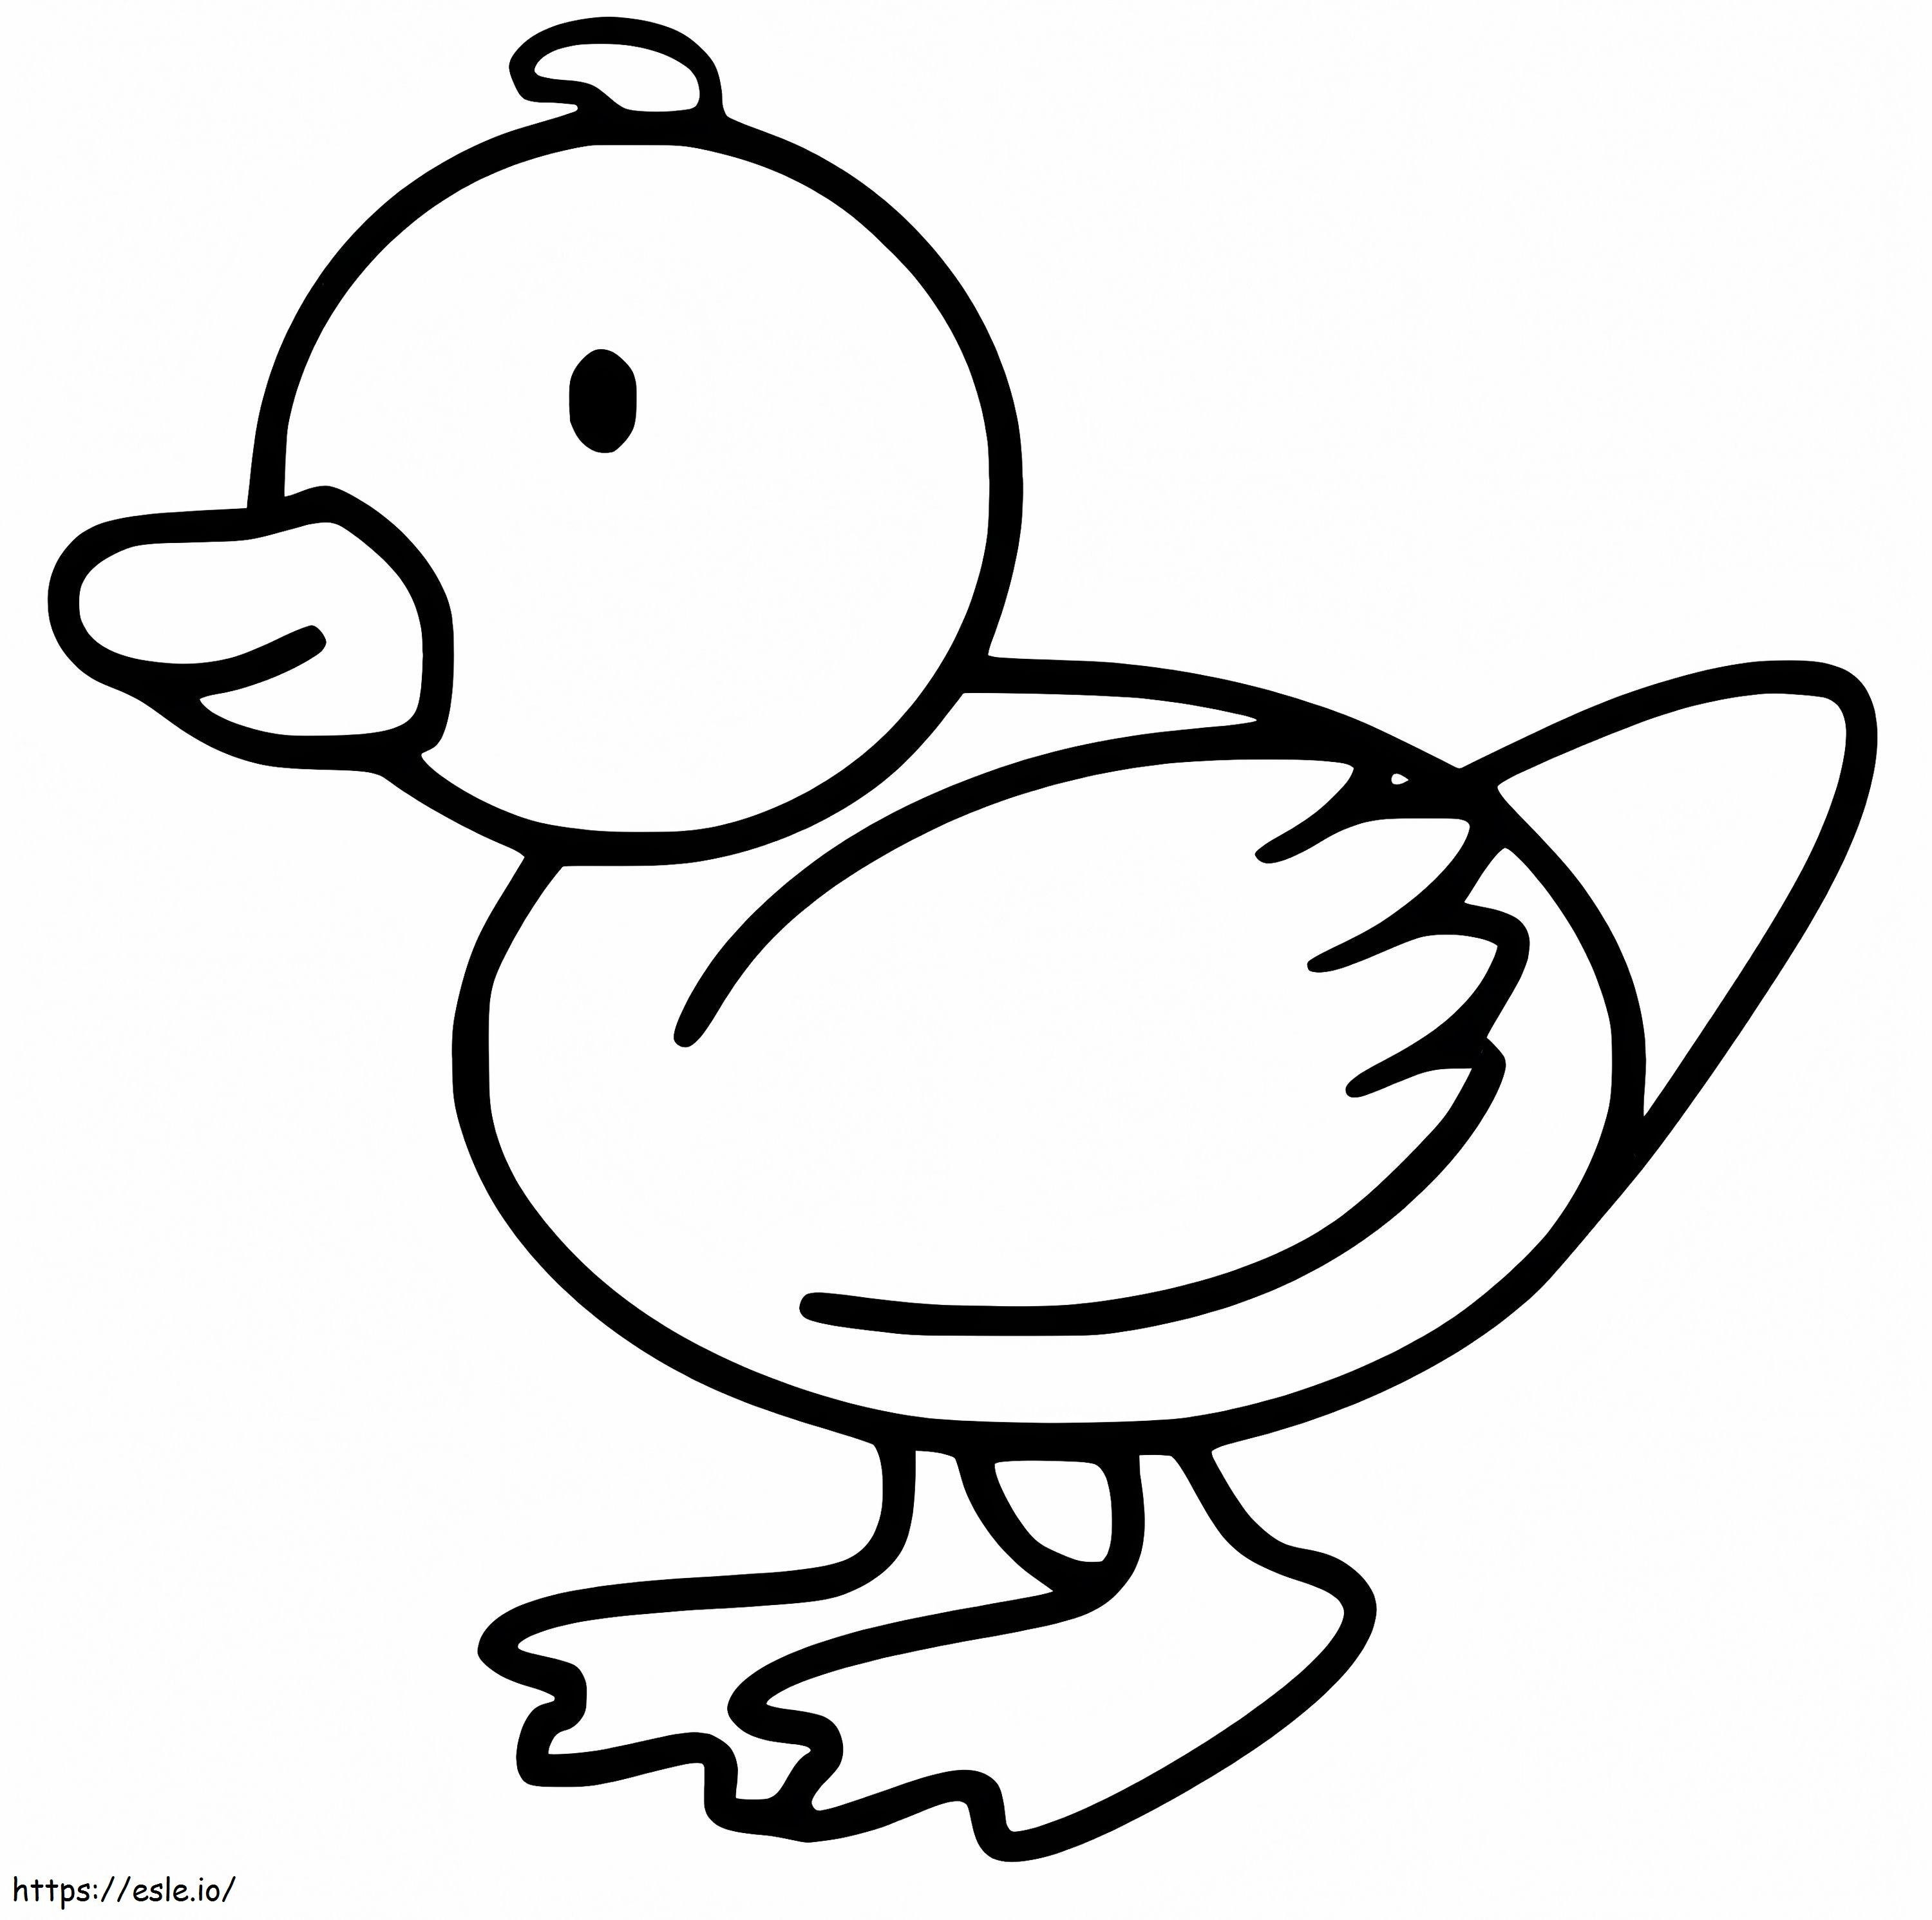 Simple Duckling coloring page